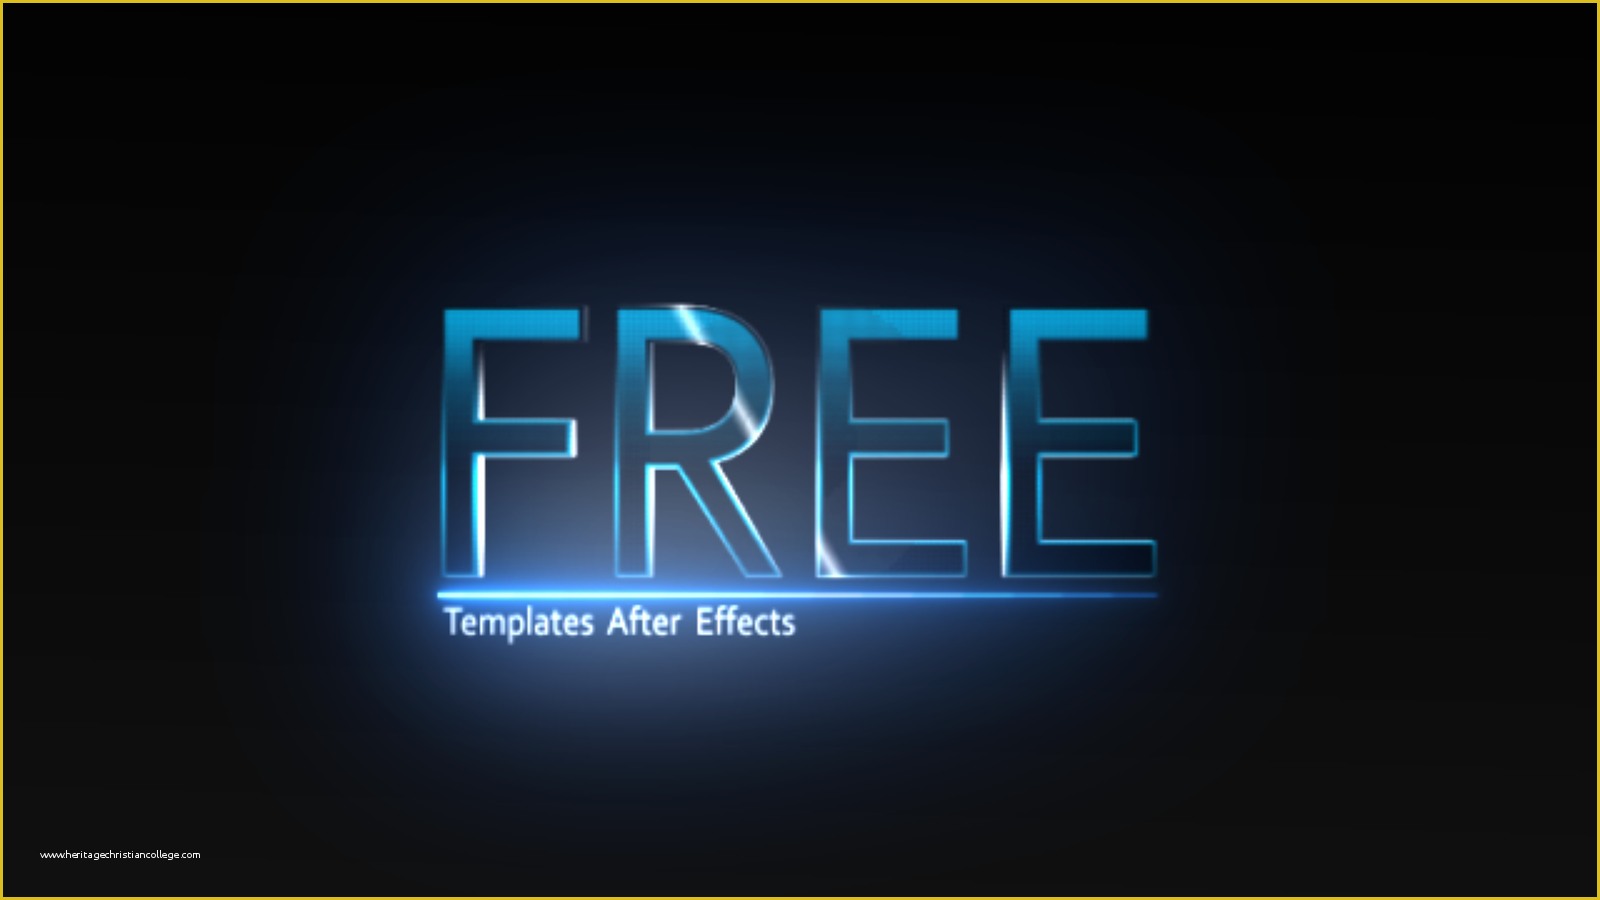 After Effects Holiday Templates Free Of Free Templates after Effects